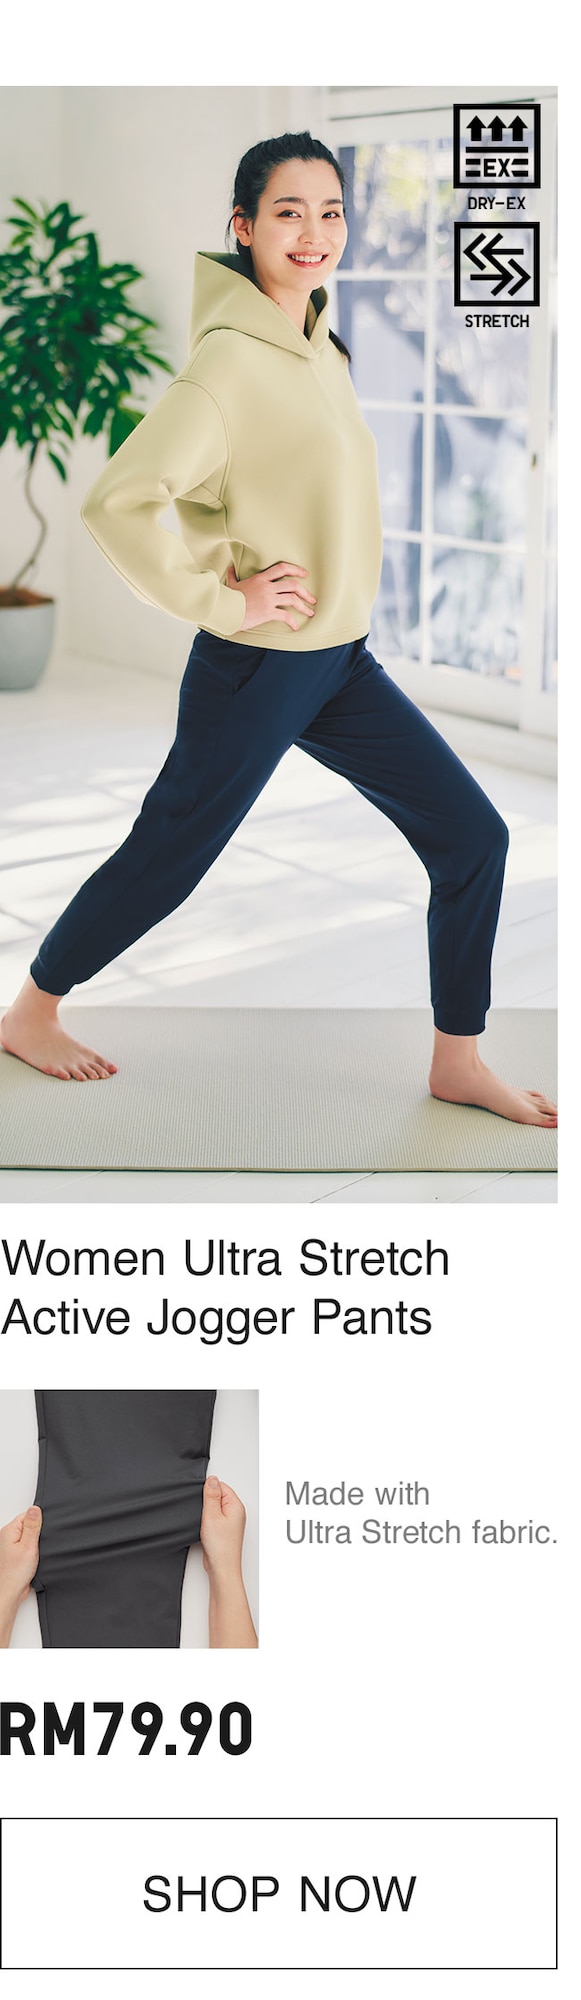 ULTRA STRETCH ACTIVE JOGGER PANTS